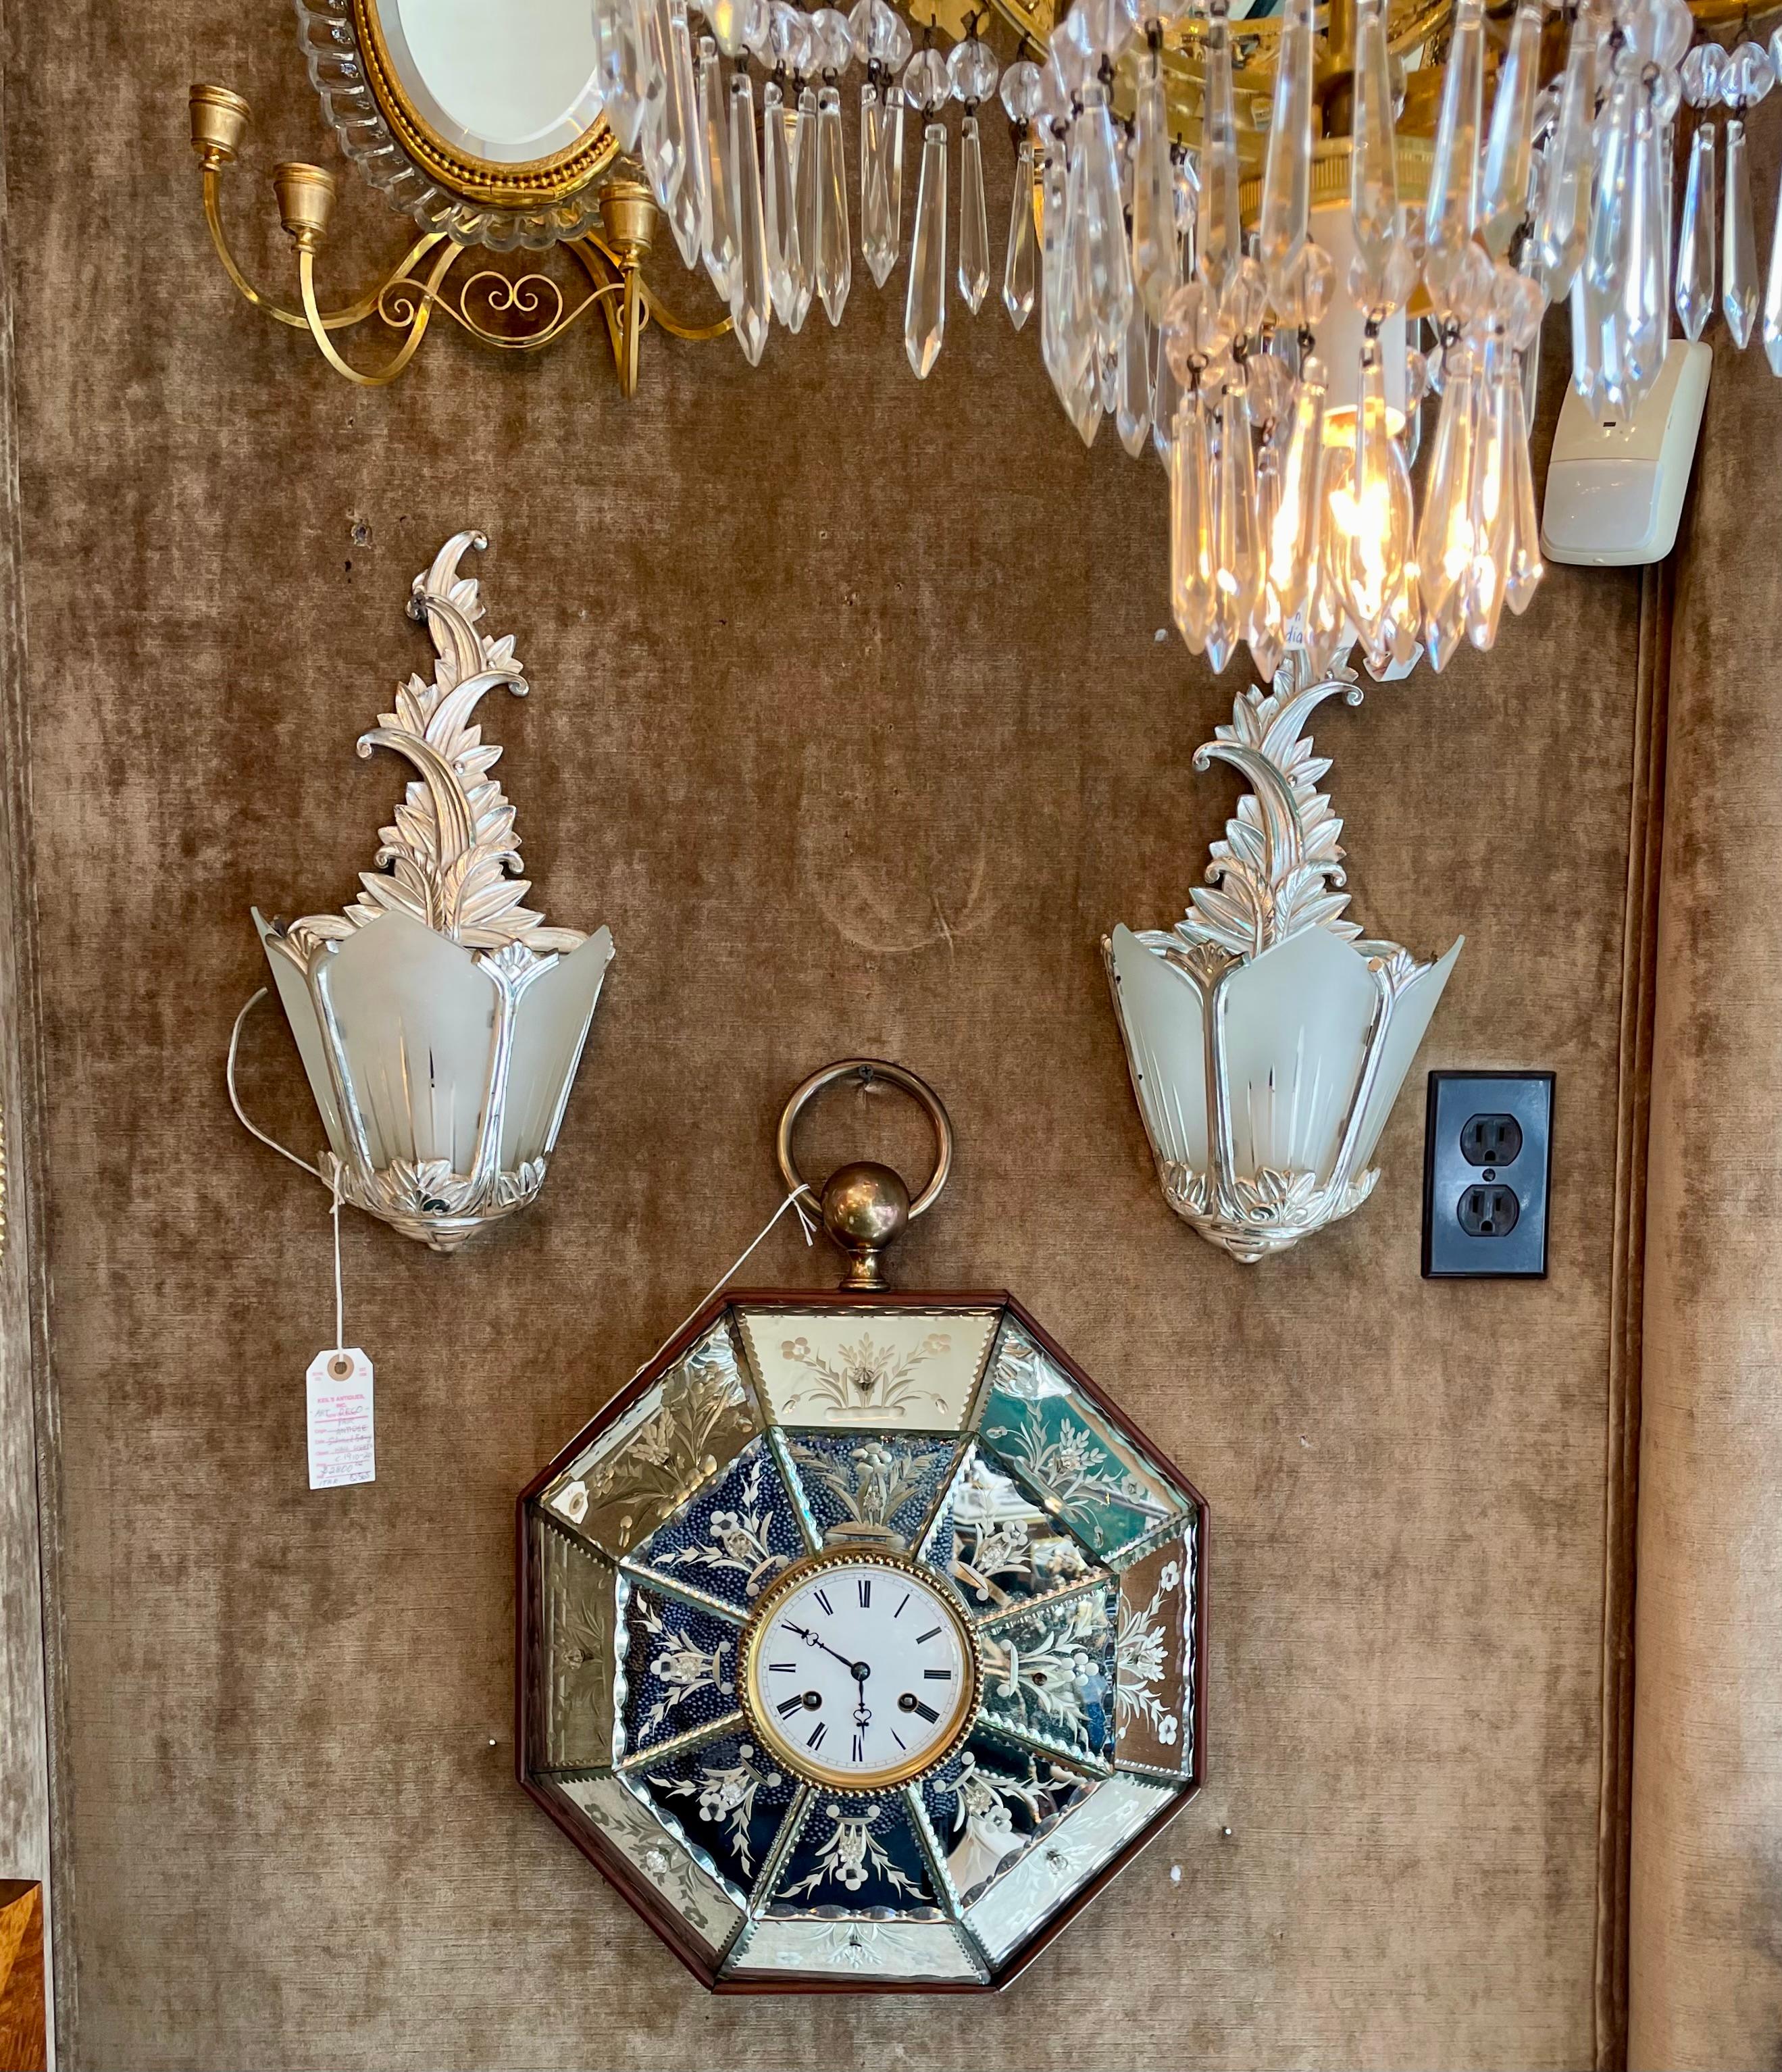 20th Century Antique Mirrored & Diamond-Etched Wall Clock, circa 1900-1910 For Sale